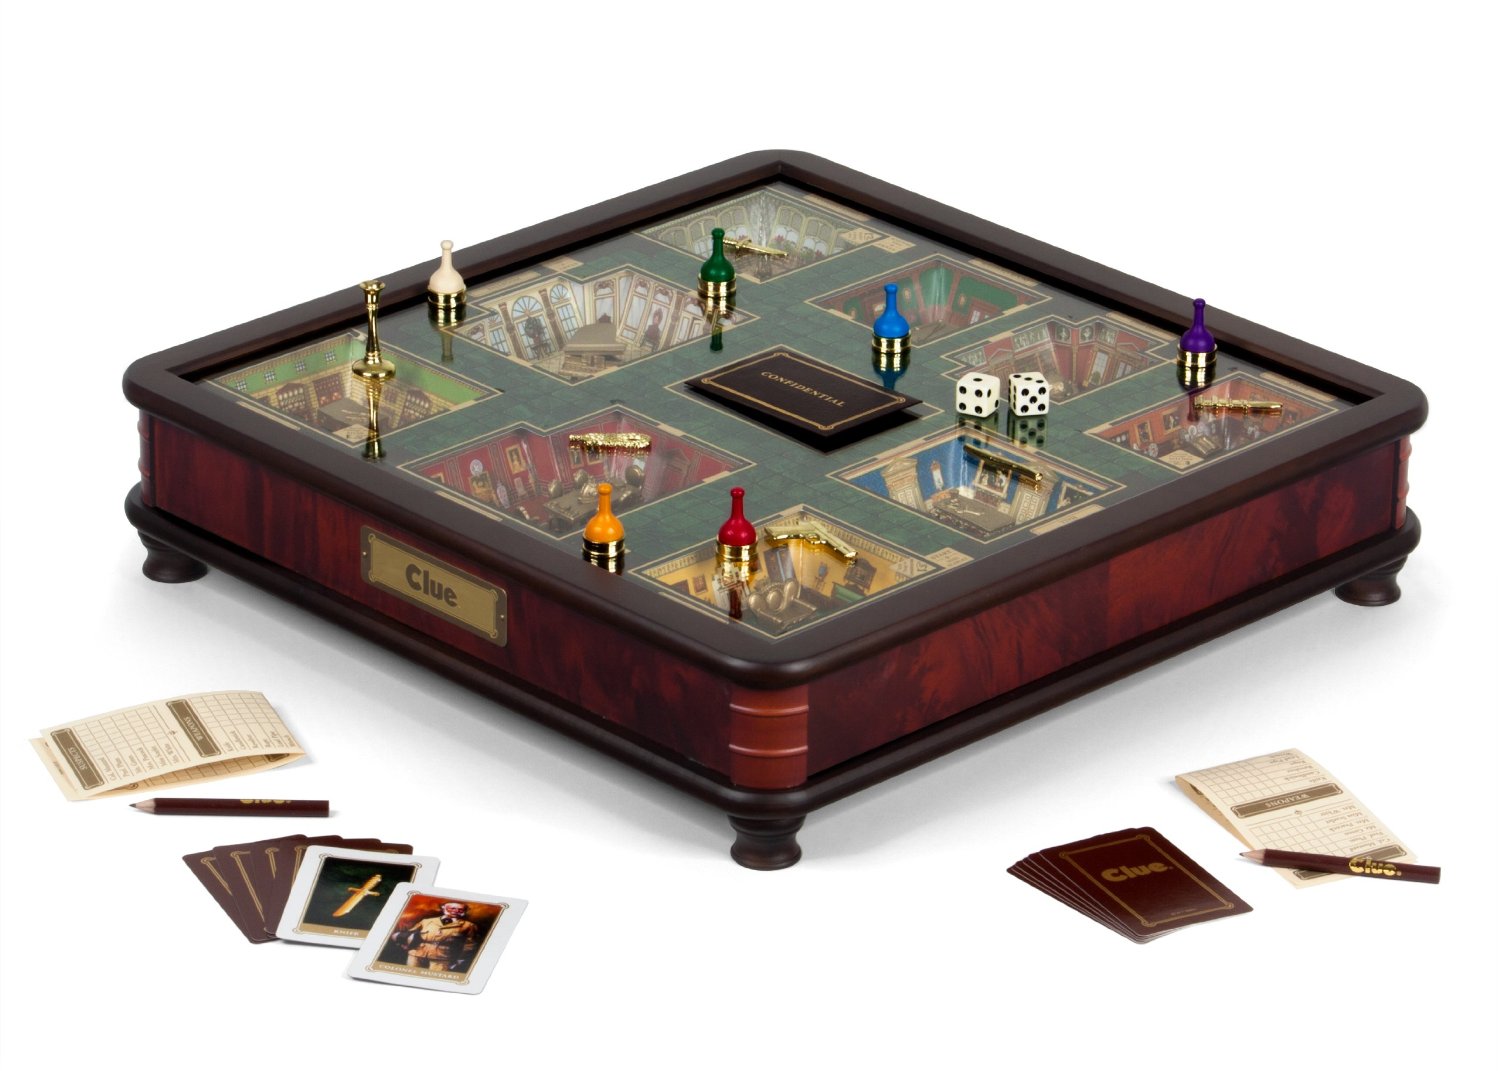 clue-luxury-edition-board-game-board-games-messiah